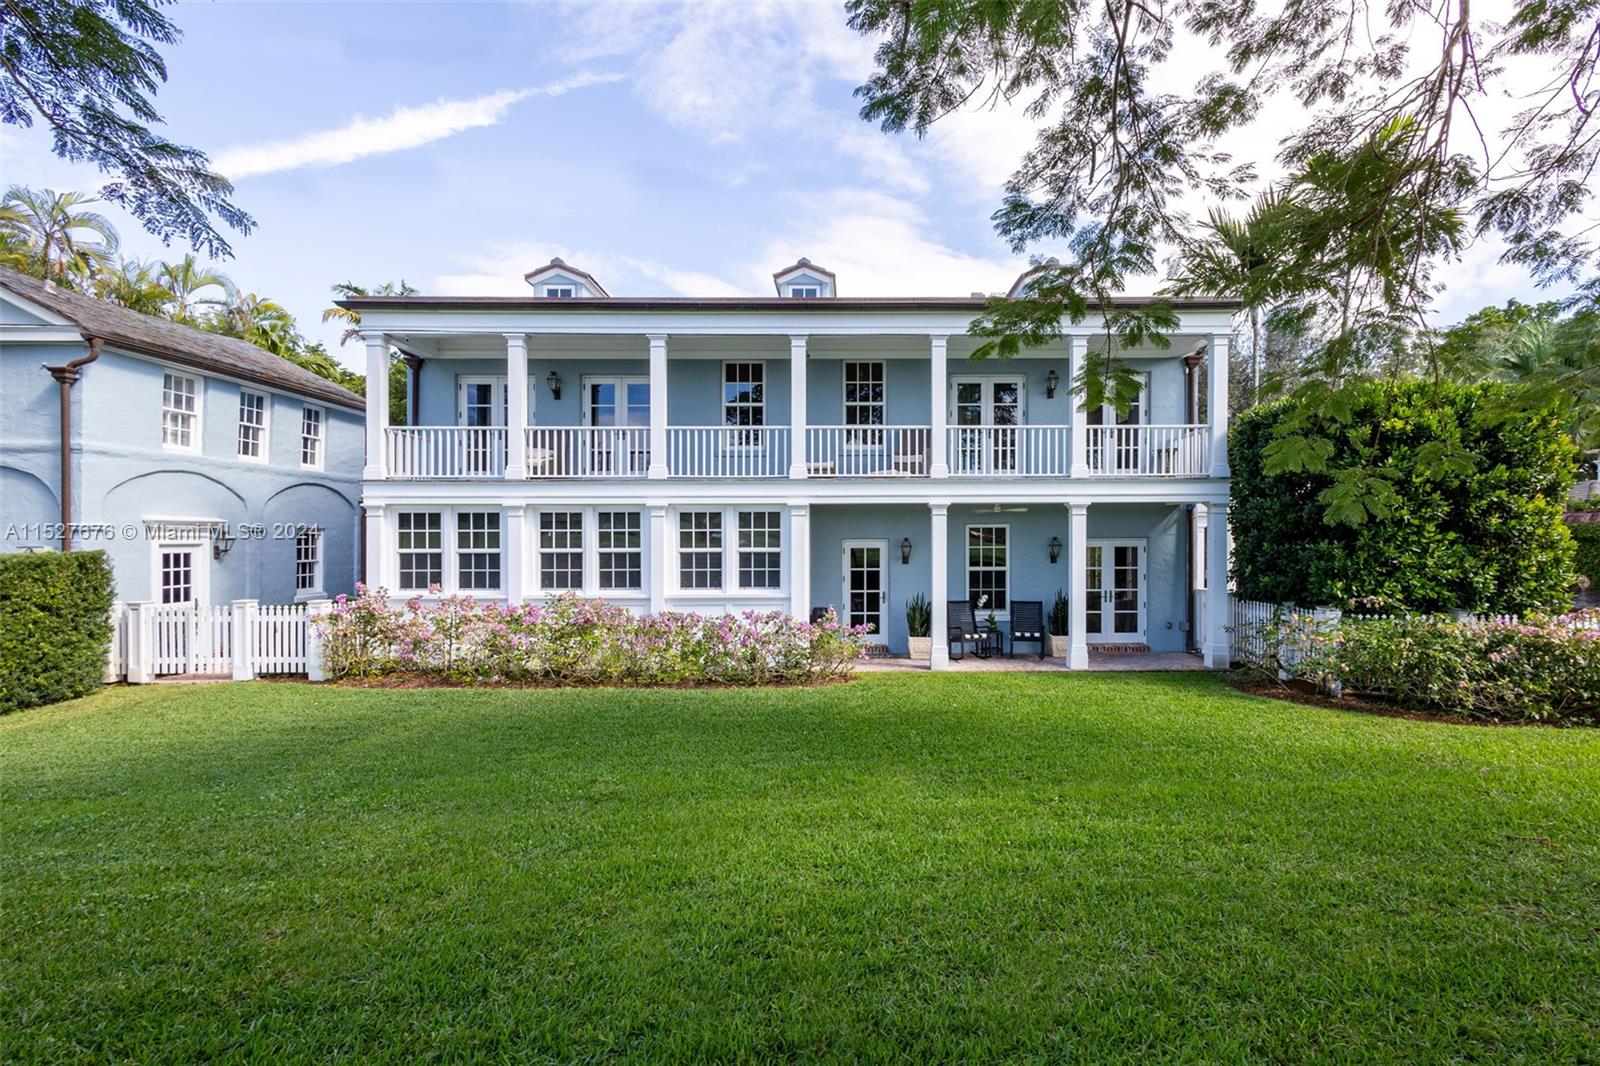 One of five original Coral Gables pioneer village homes, this impeccable 1938 8,711 SF estate on picturesque Santa Maria Street overlooks the 15th hole of the Riviera Golf Course. The 5-bedroom, 4-bathroom and 2 half-bath home has large living spaces,  wraparound balconies, and great views from every room. A renovated gourmet eat-in kitchen has an impressive center island with seating, quartz countertops, luxury appliances, gas stove, and butler’s pantry. Magnificent outdoor entertaining areas have a pool, manicured gardens, large gazebo with plenty of seating, and full summer kitchen with built-in grill and pizza oven. Includes a guesthouse, whole-house generator connected to the city gas line, new hurricane shuttering, 2-car garage, and new slate roof.